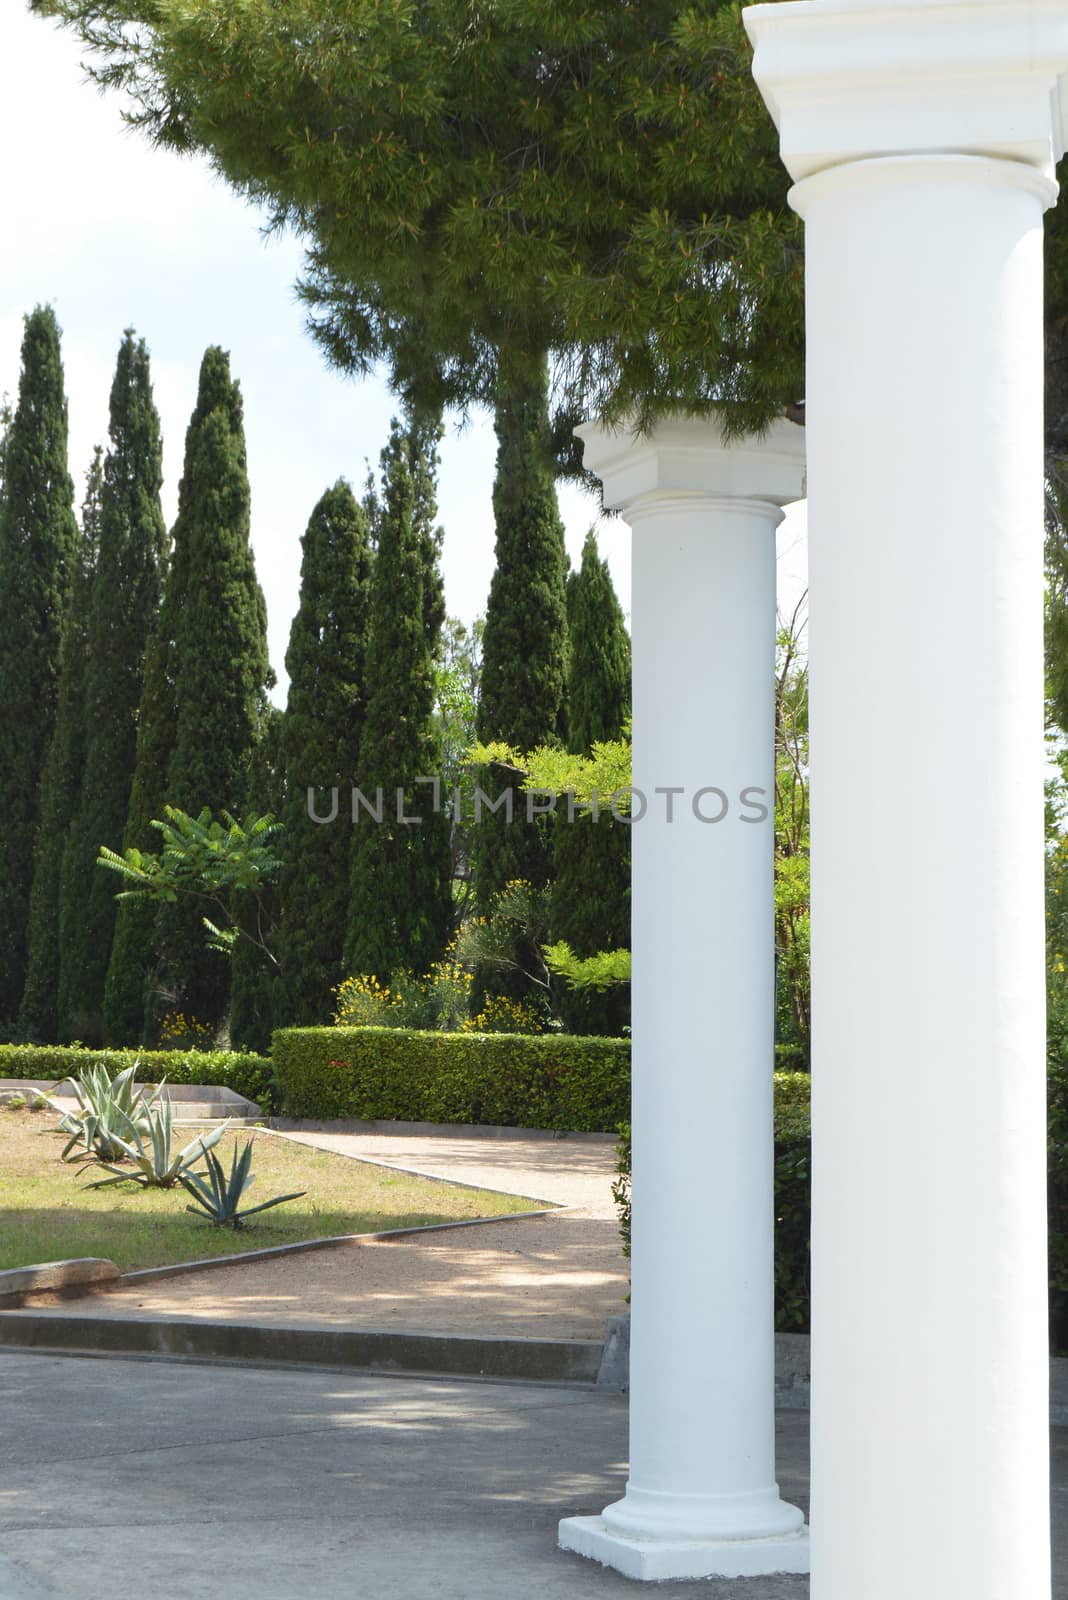 White decorative columns in Greek style to decorate the Park.